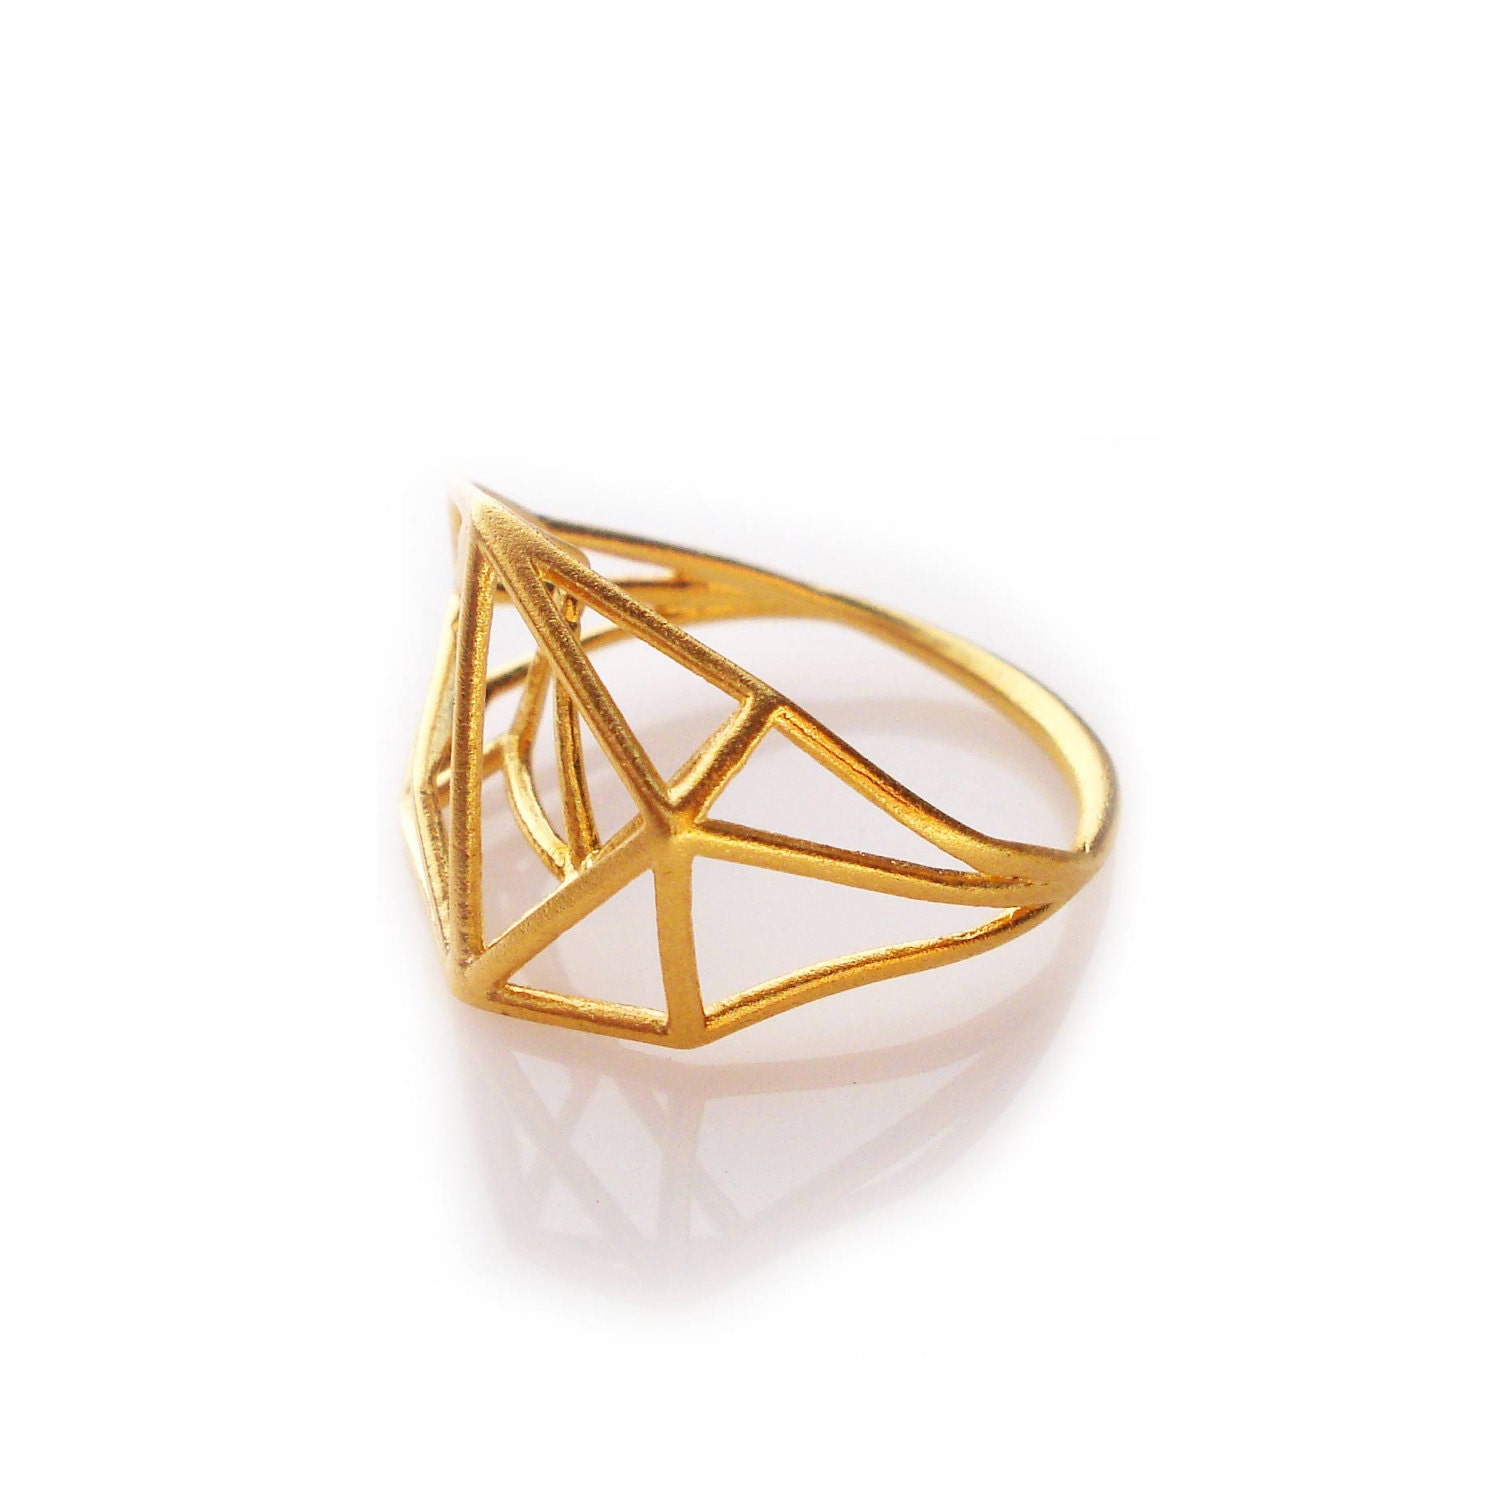 Architectural Structure Geometric Gold Ring Blog / Le blog d'awa ETSY